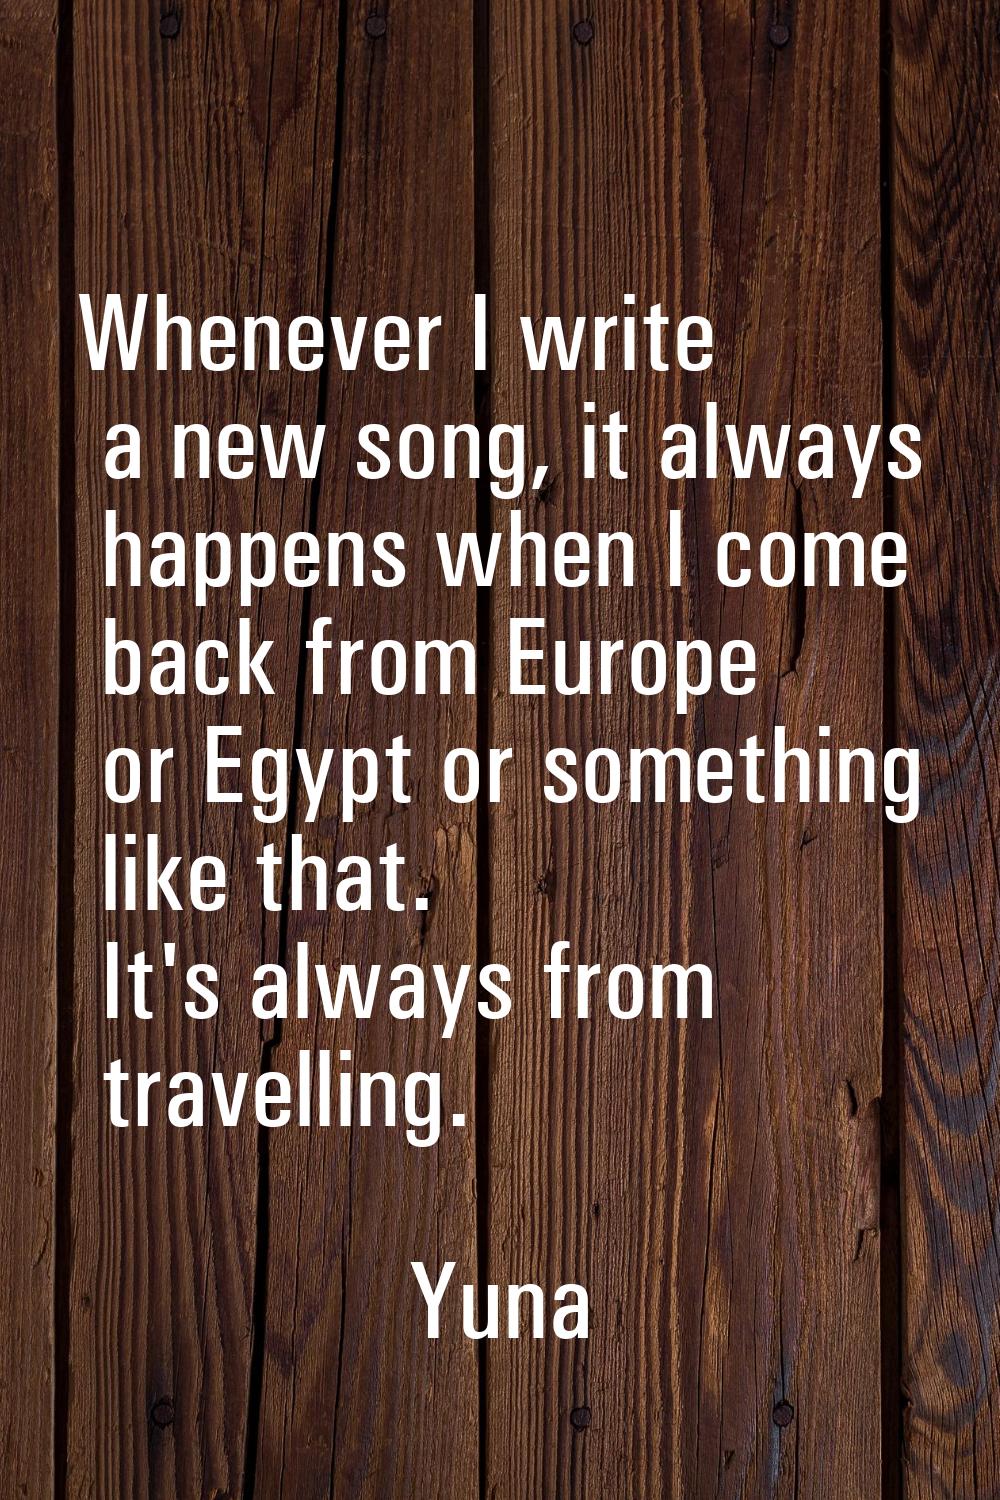 Whenever I write a new song, it always happens when I come back from Europe or Egypt or something l